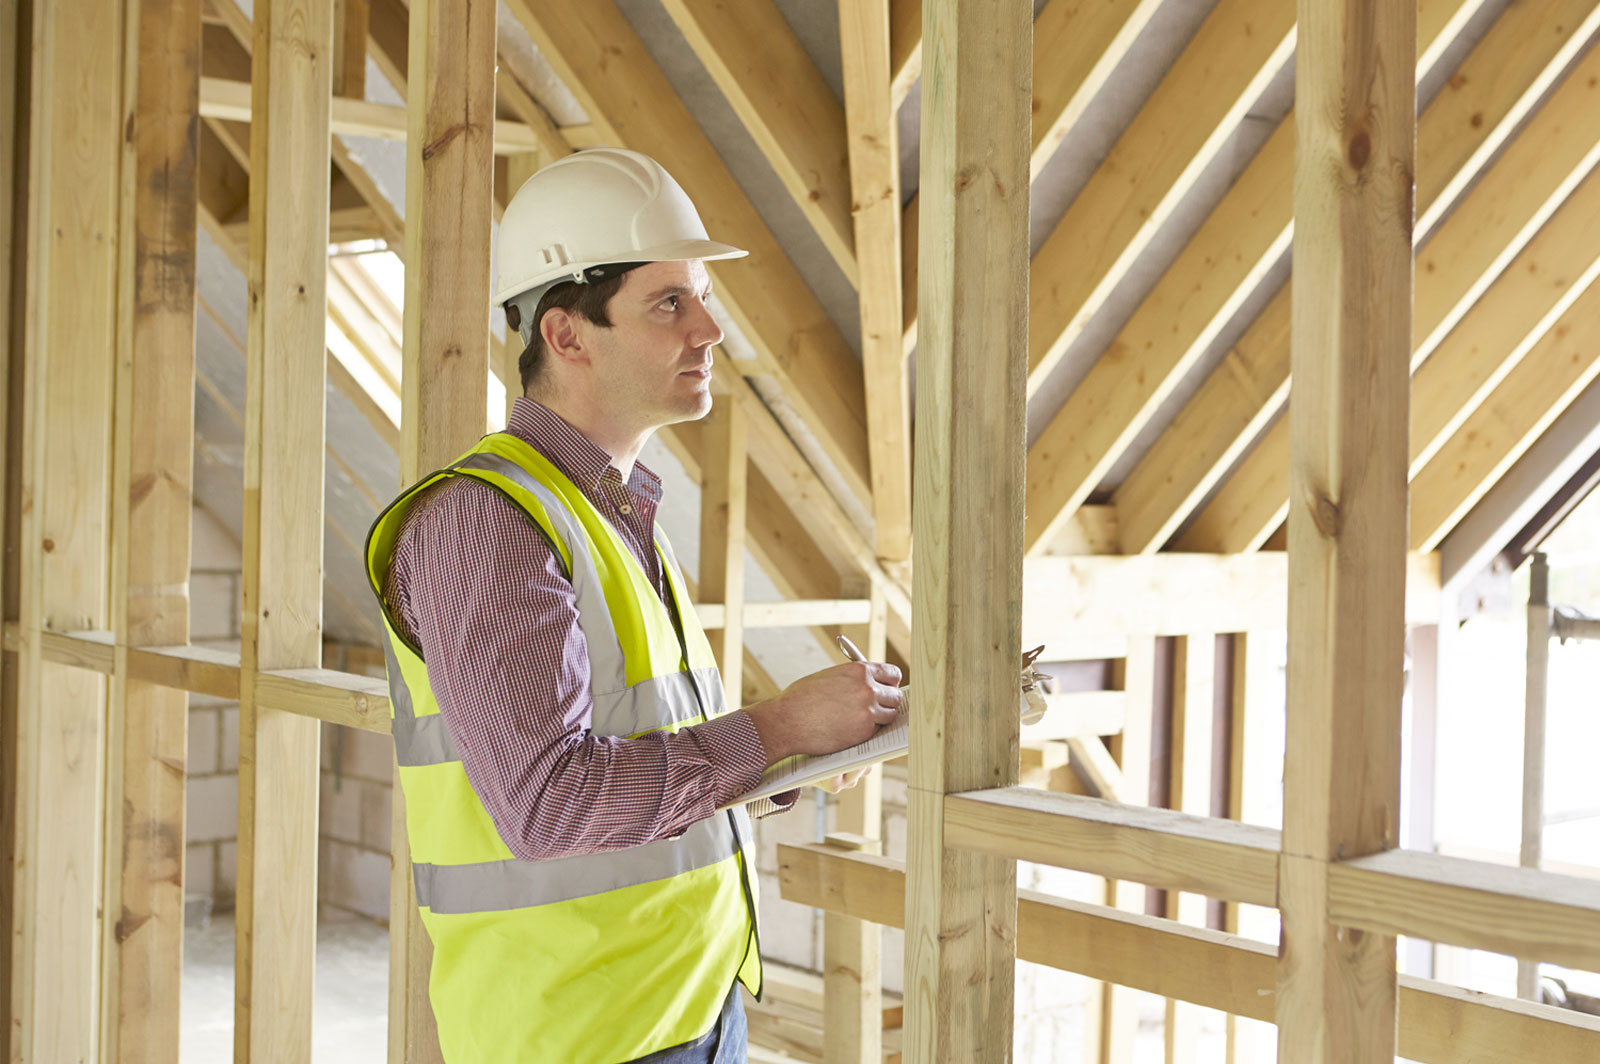 The Compliance Checklist: What Building Inspection Experts Look For